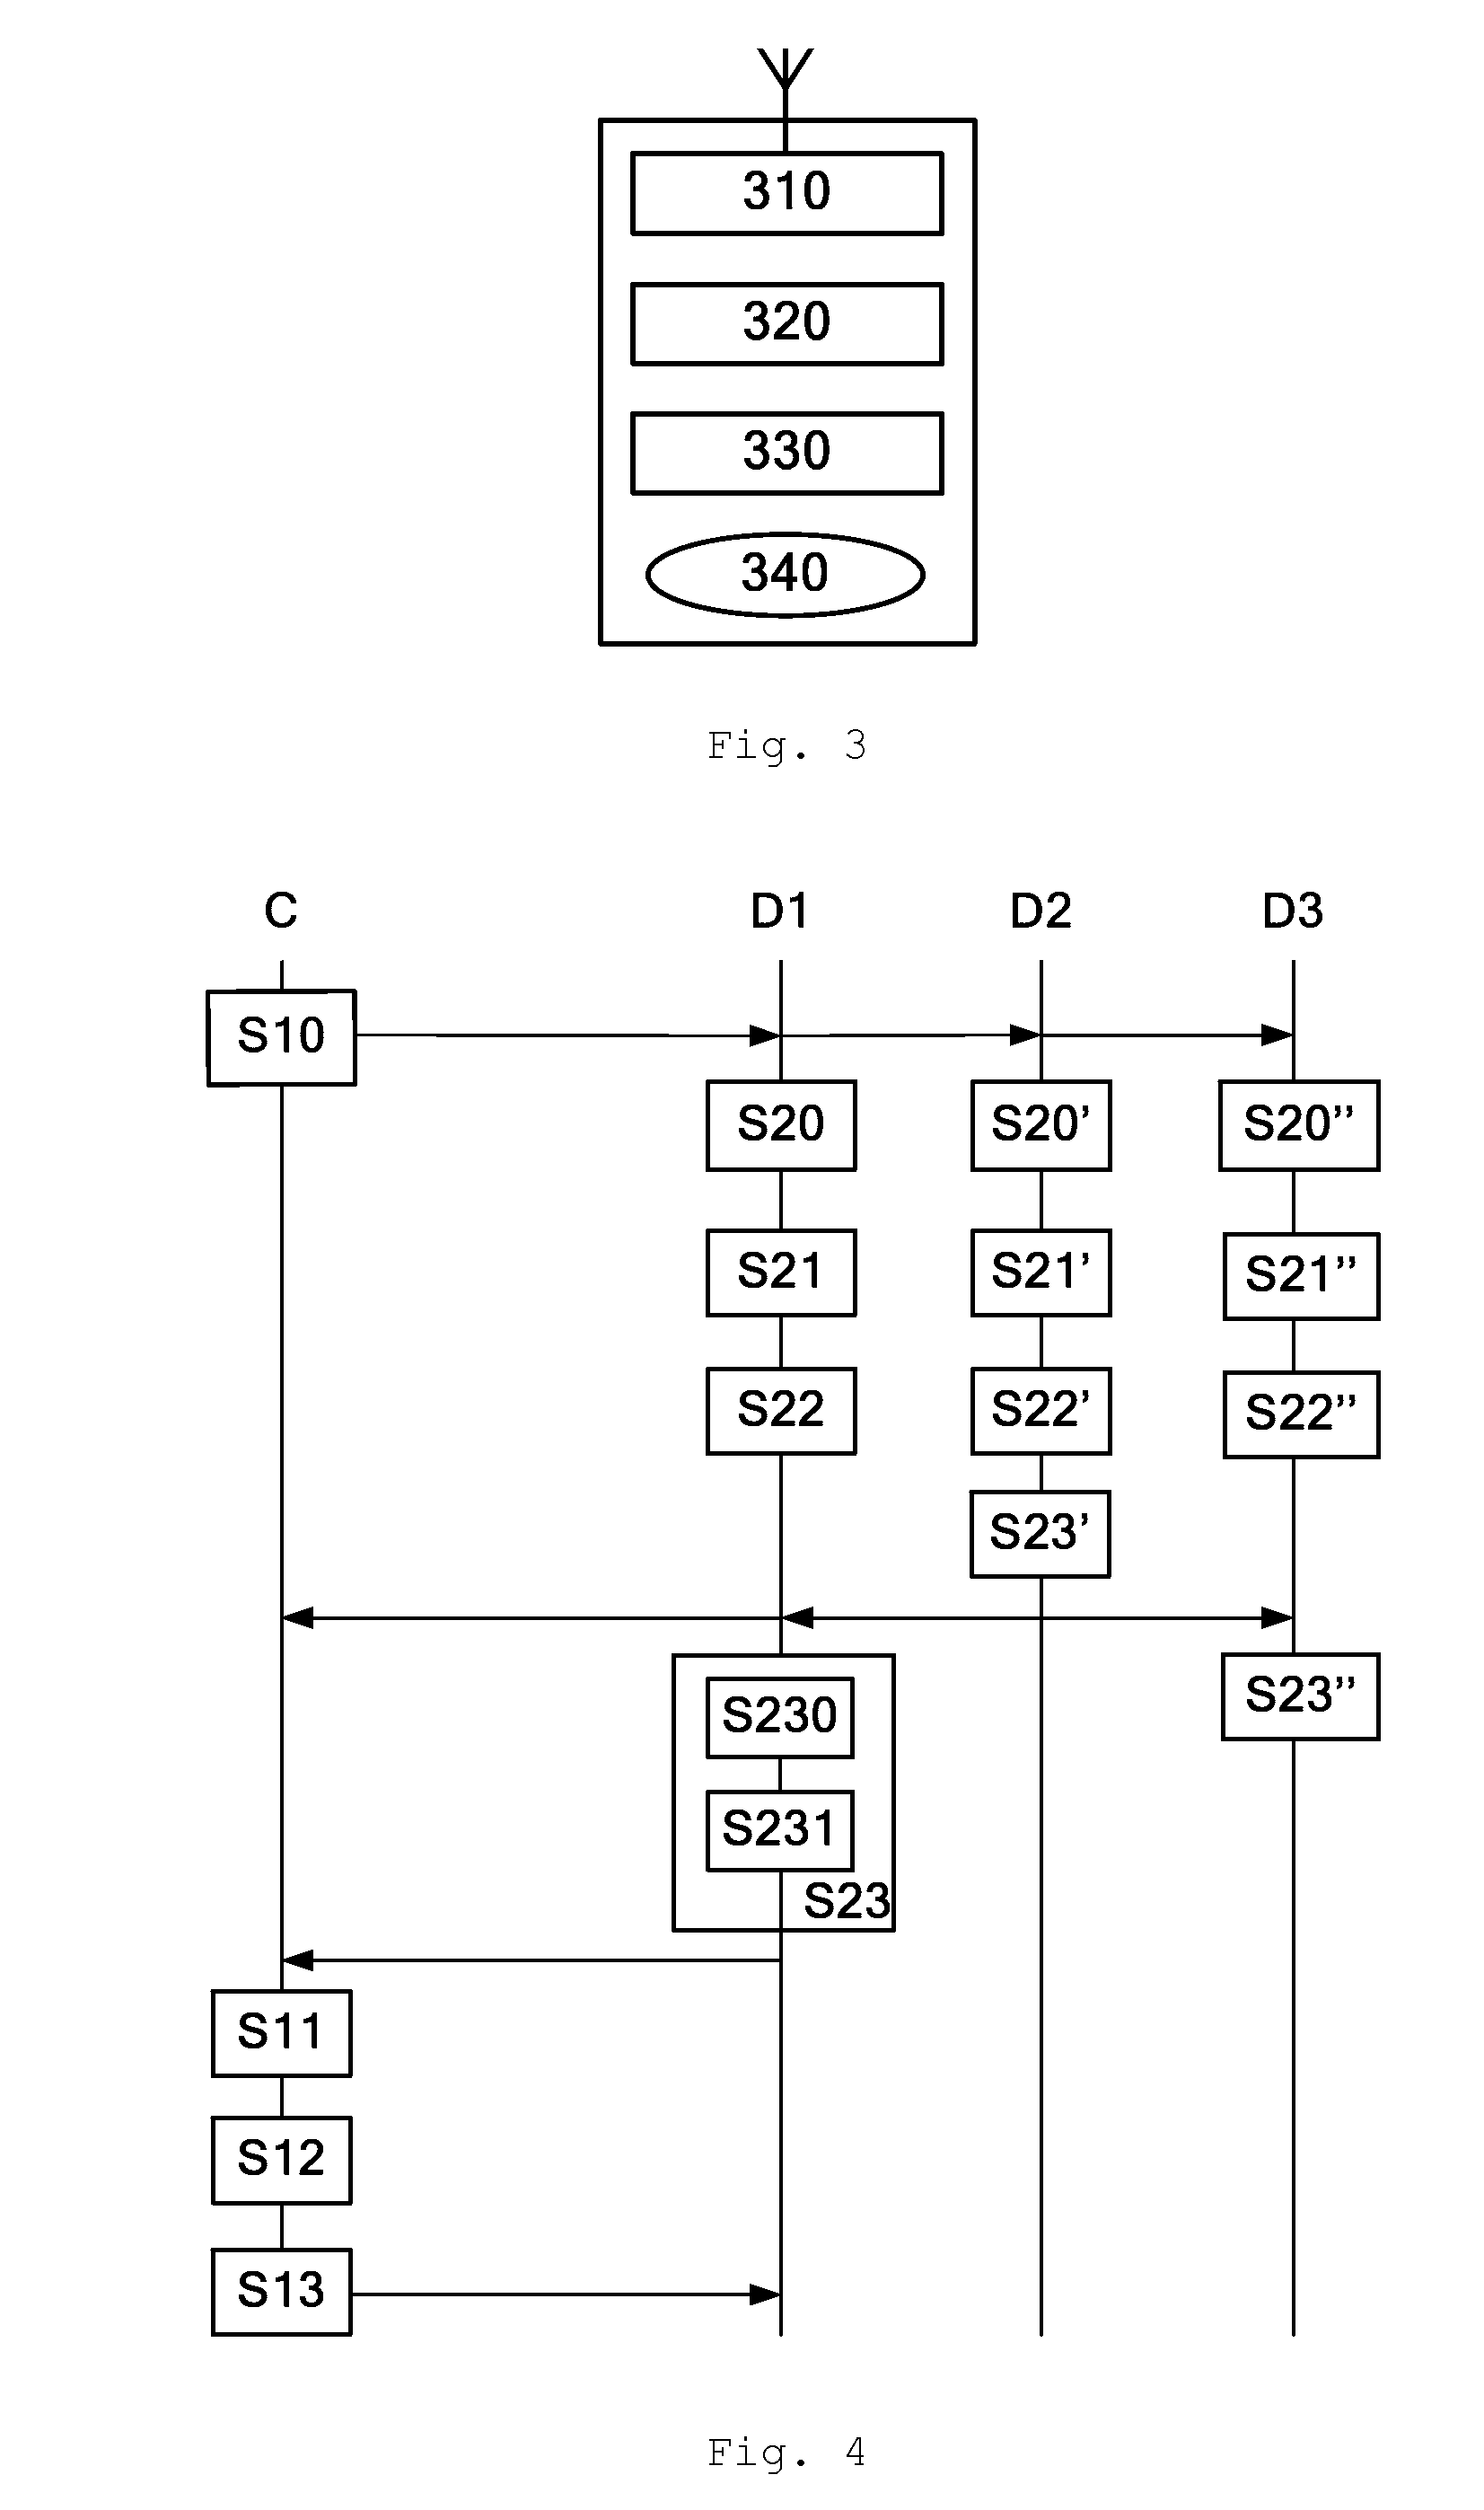 Methods for selecting and controlling devices